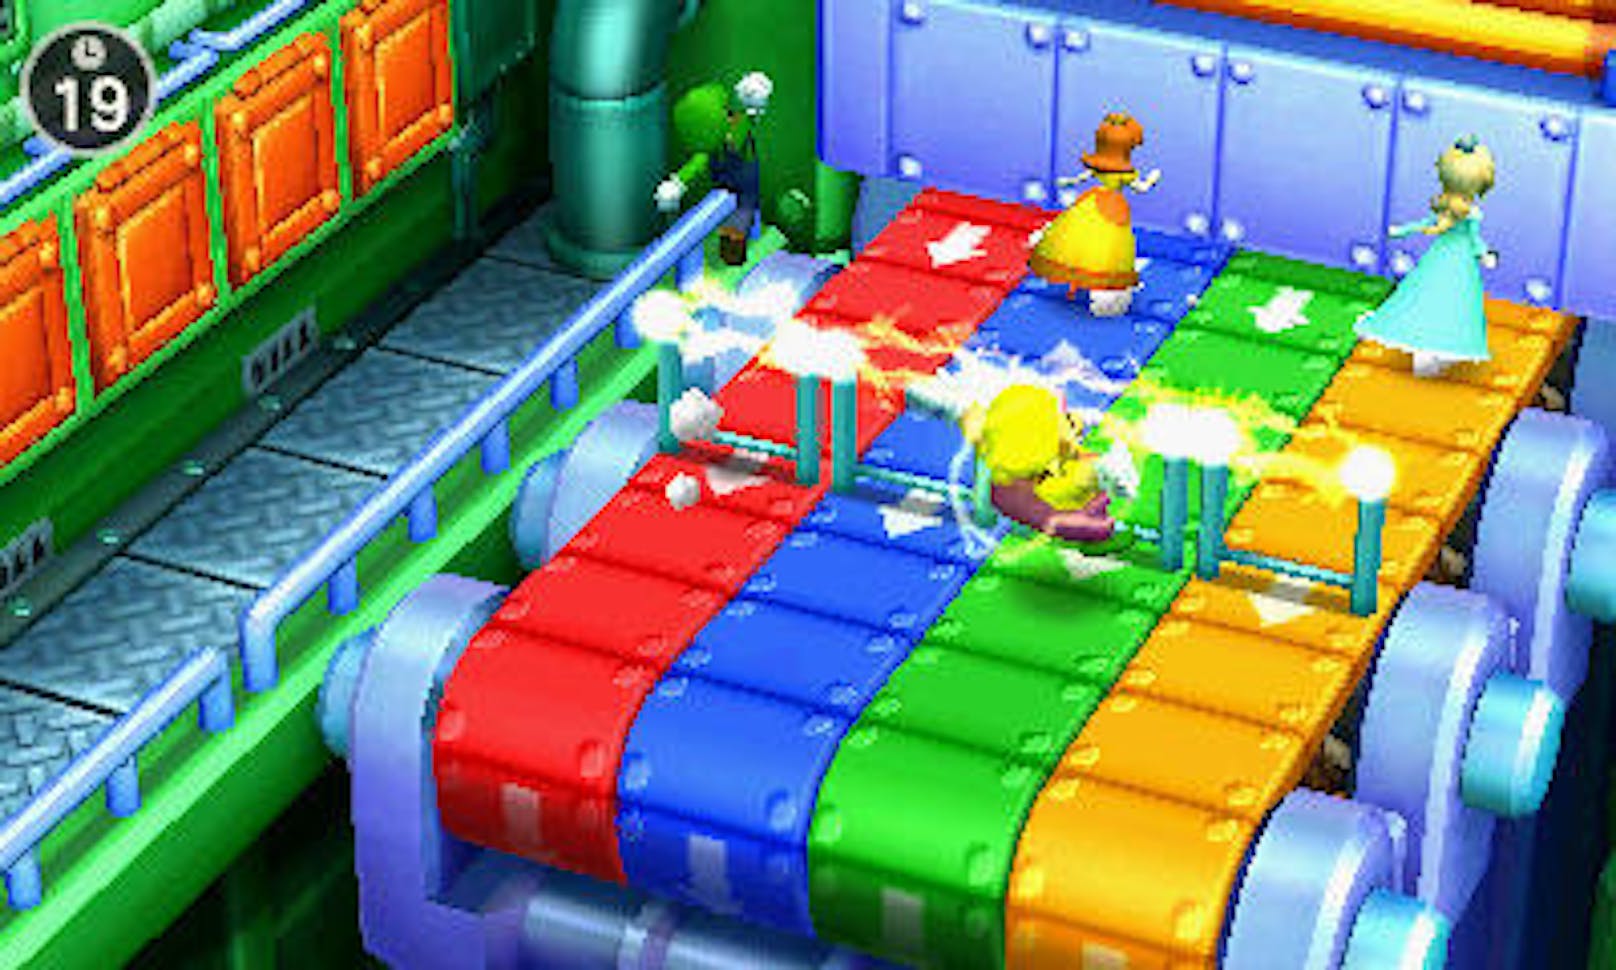  <a href="https://www.heute.at/digital/games/story/Mario-Party--The-Top-100-im-Test-40118743" target="_blank">Mario Party: The Top 100</a>